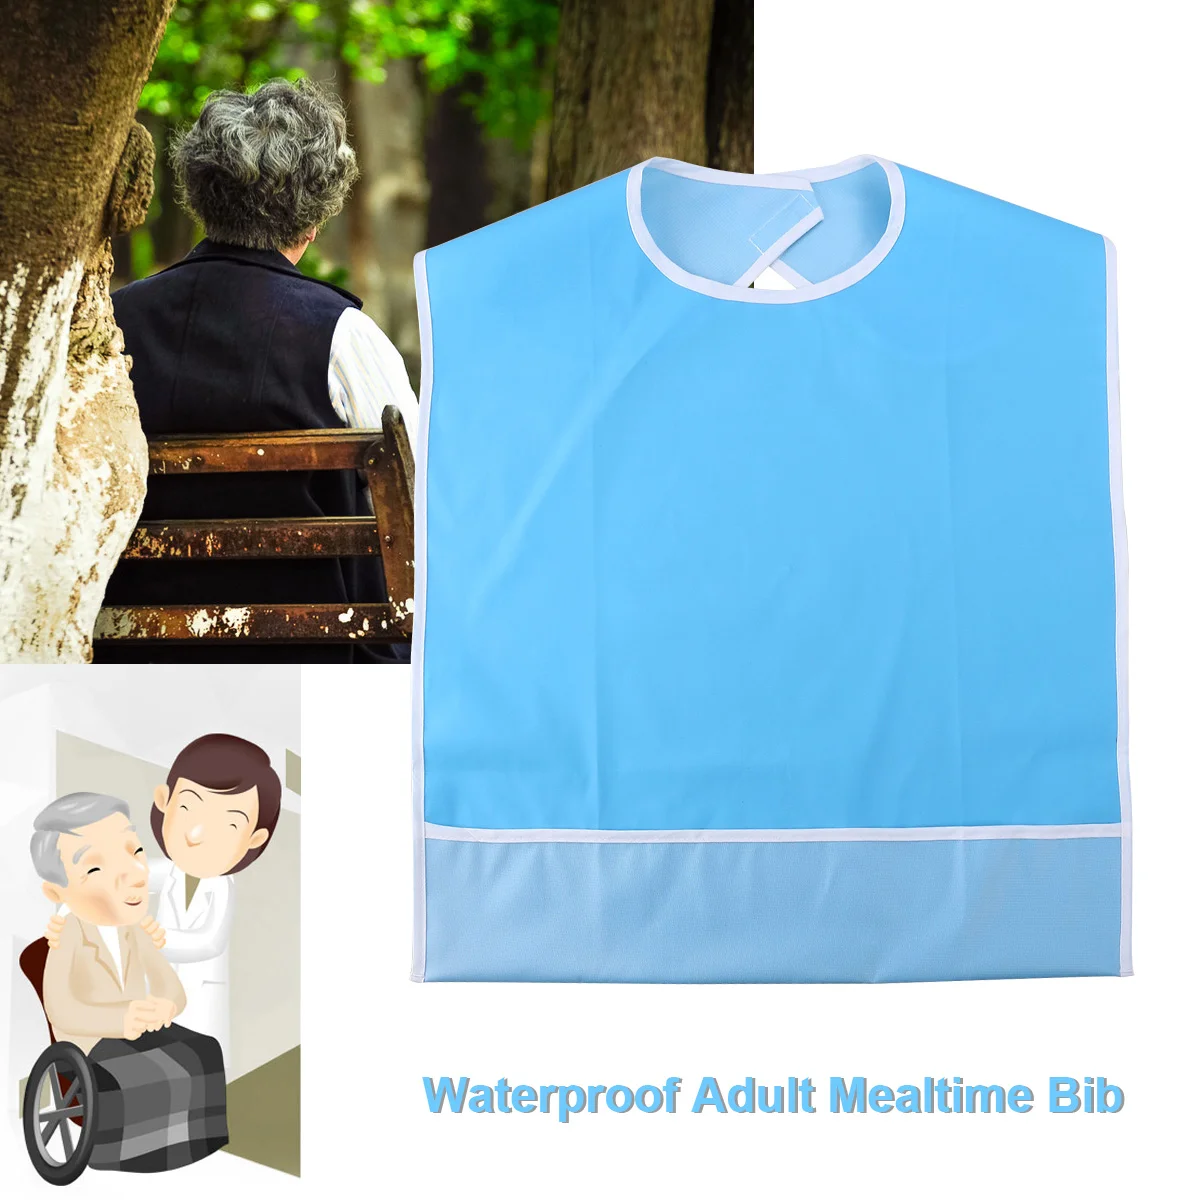 

Bib Adult Mealtime Bibs Protector Waterproof Apron Eating Clothing Aid Set Adults Cloth Feeding The Elderly Patient Absorbent